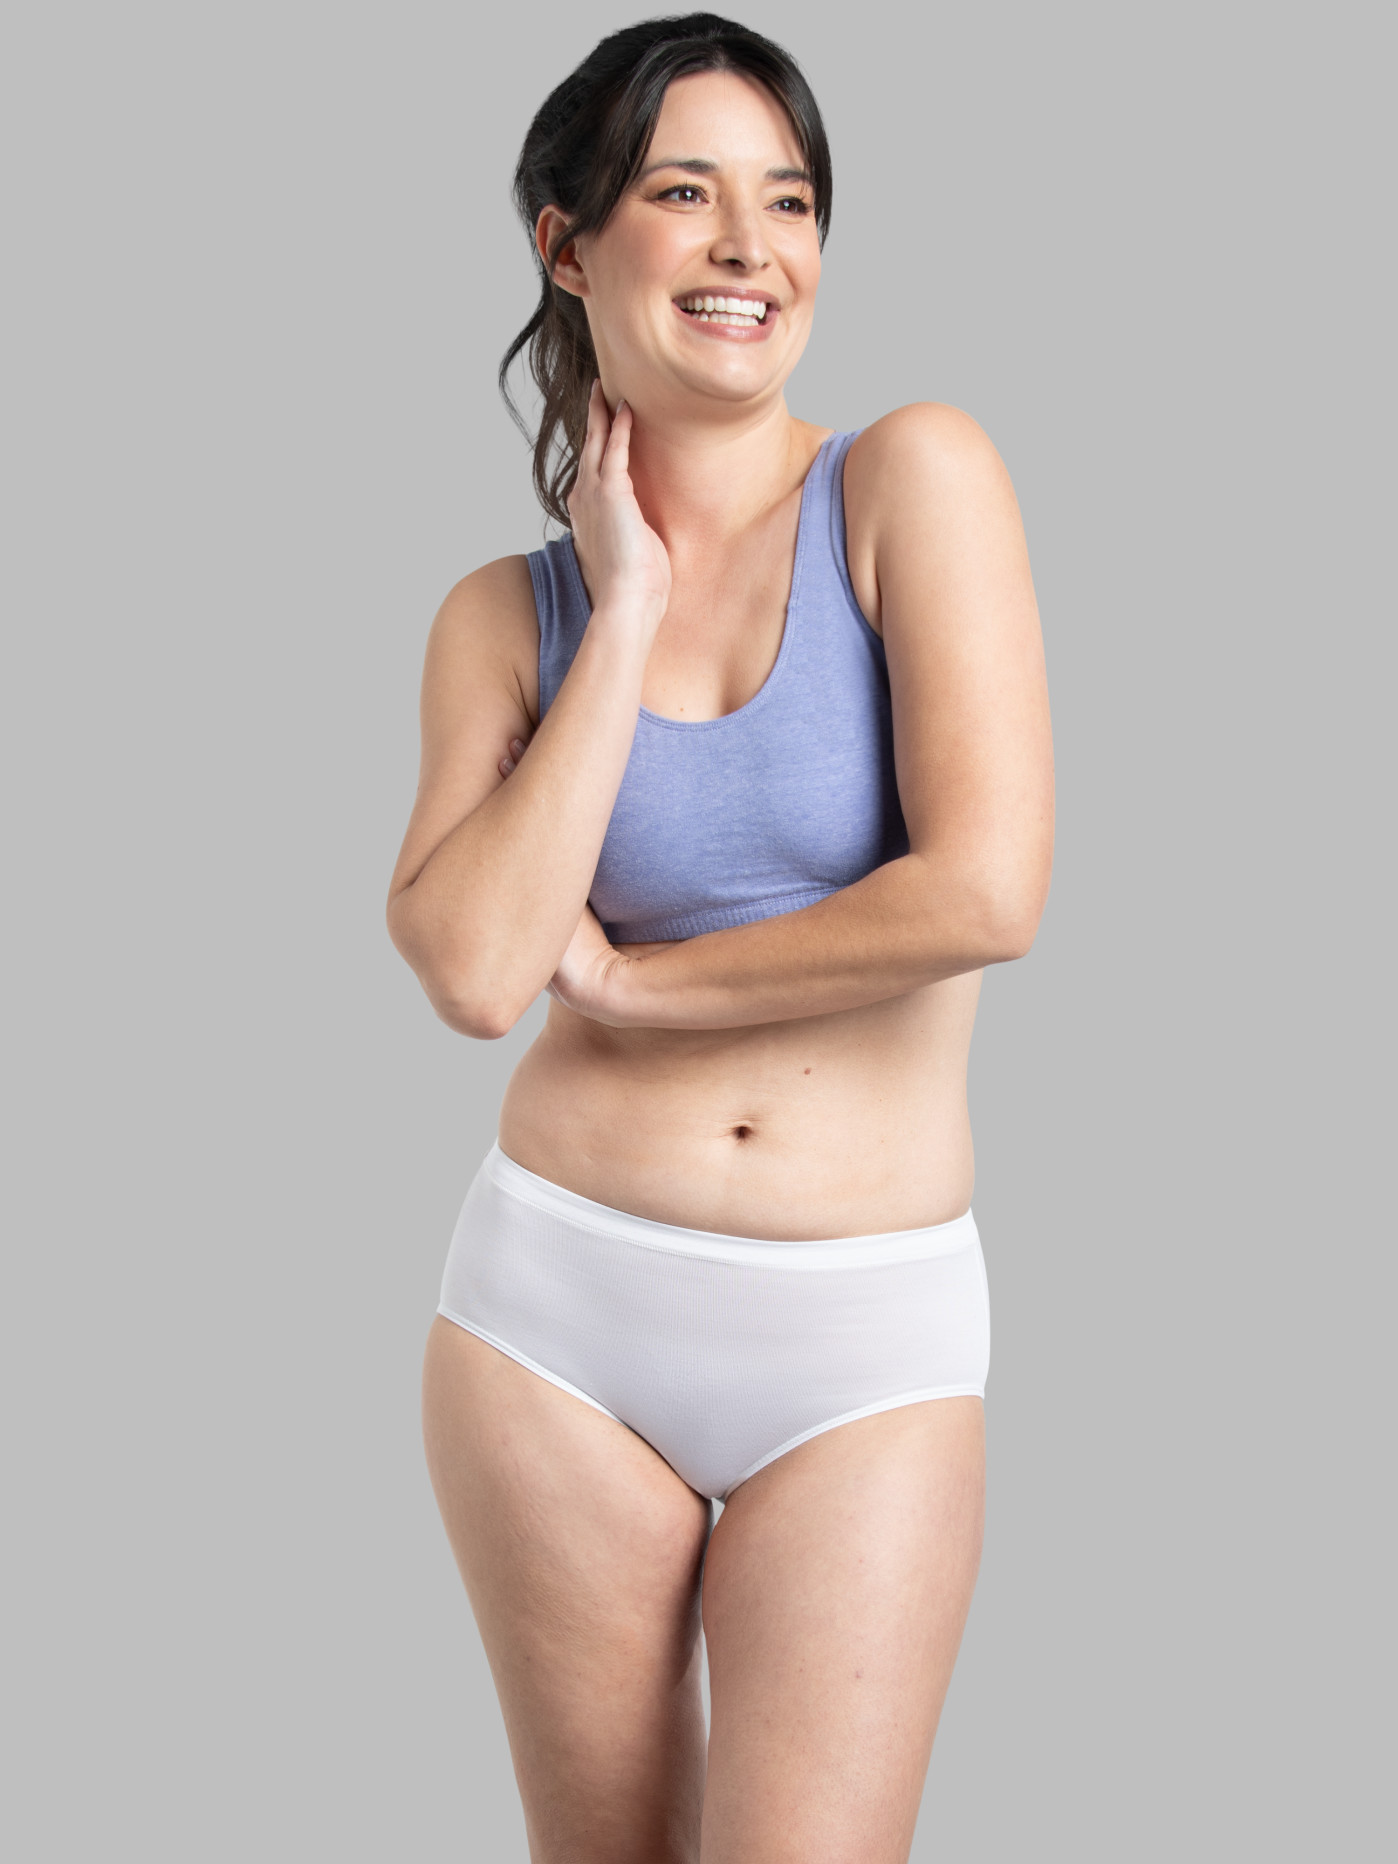 Extended Size Mid Rise Cotton Briefs - 5 Pack ASST 2XL by Fruit Of The Loom